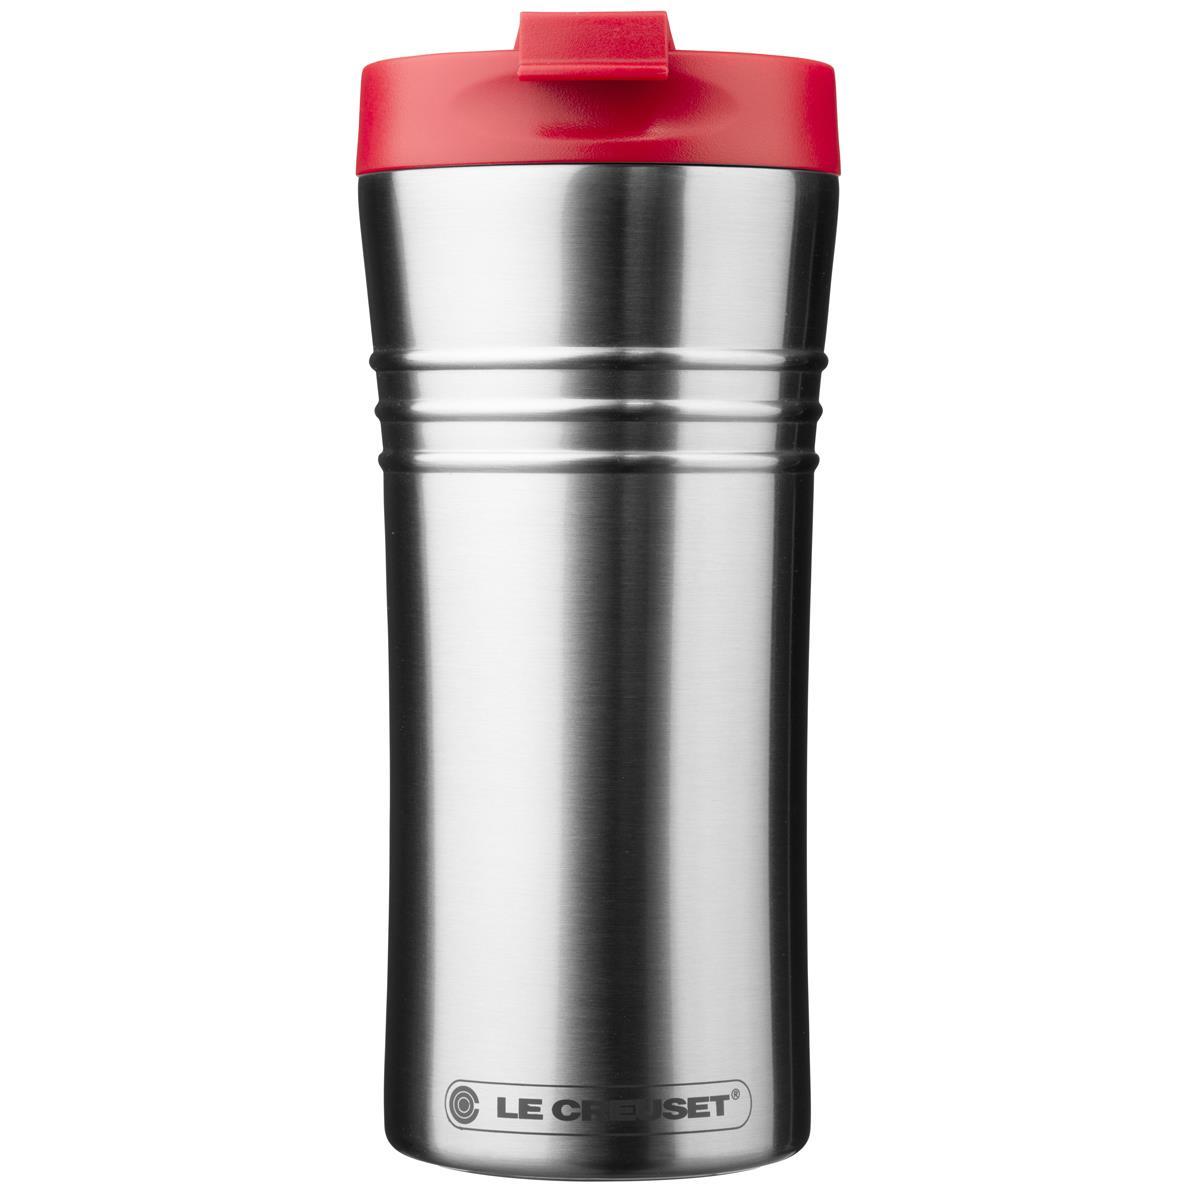 What lid options does the Le Creuset travel mug offer?